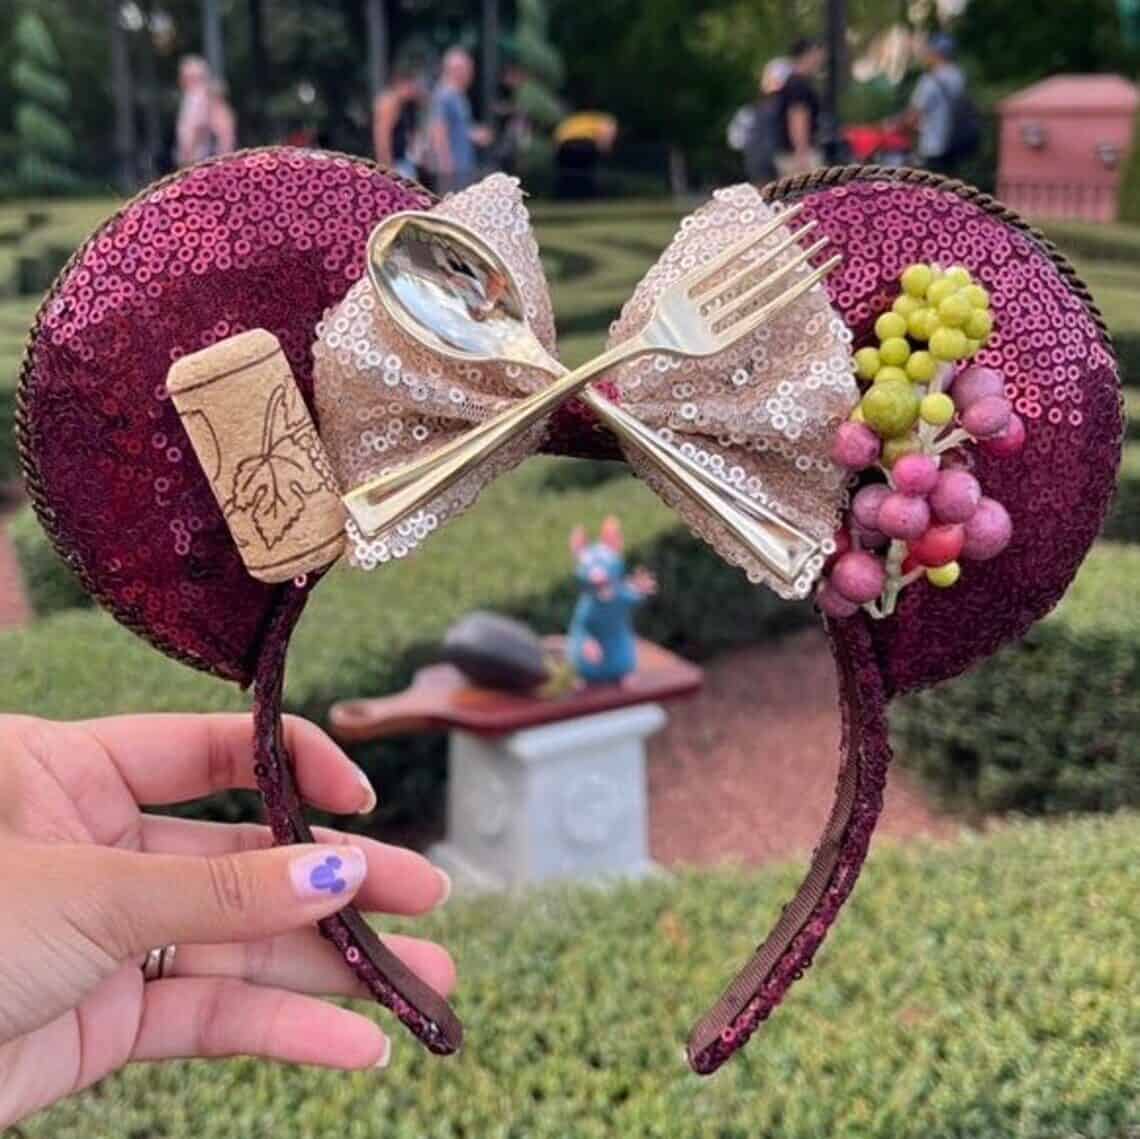 EPCOT food and wine festival l Mickey ears - purple with cork, spoon and fork, and fake grapes.